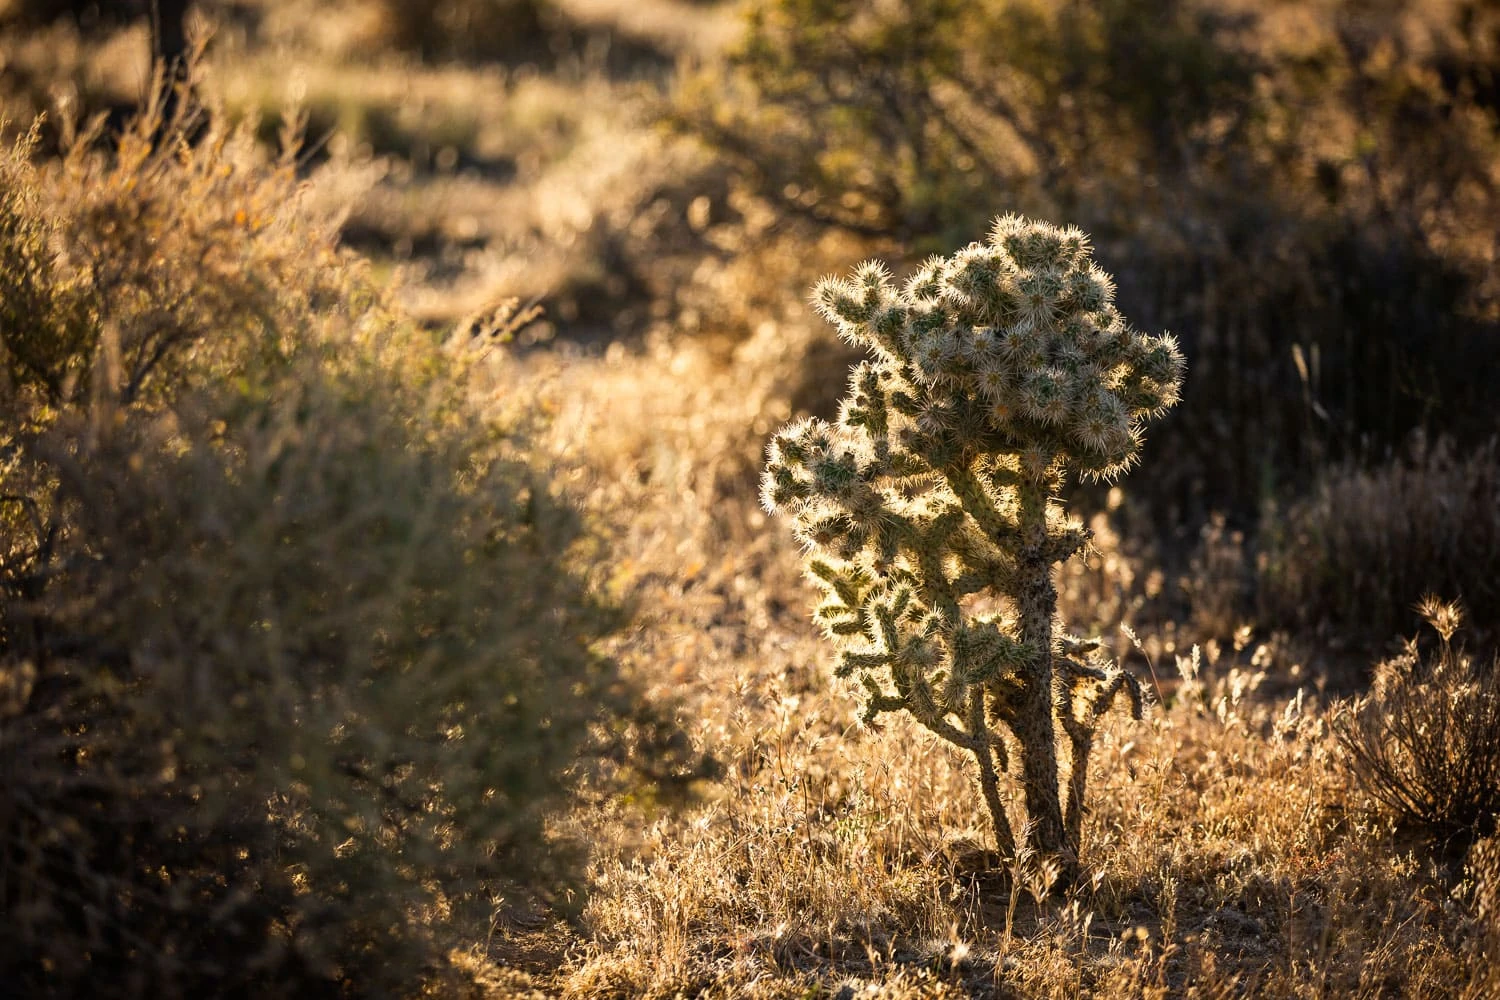 A Cholla cactus inside the cactus gardens of Joshua Tree National Park is backlit by strong sunlight.